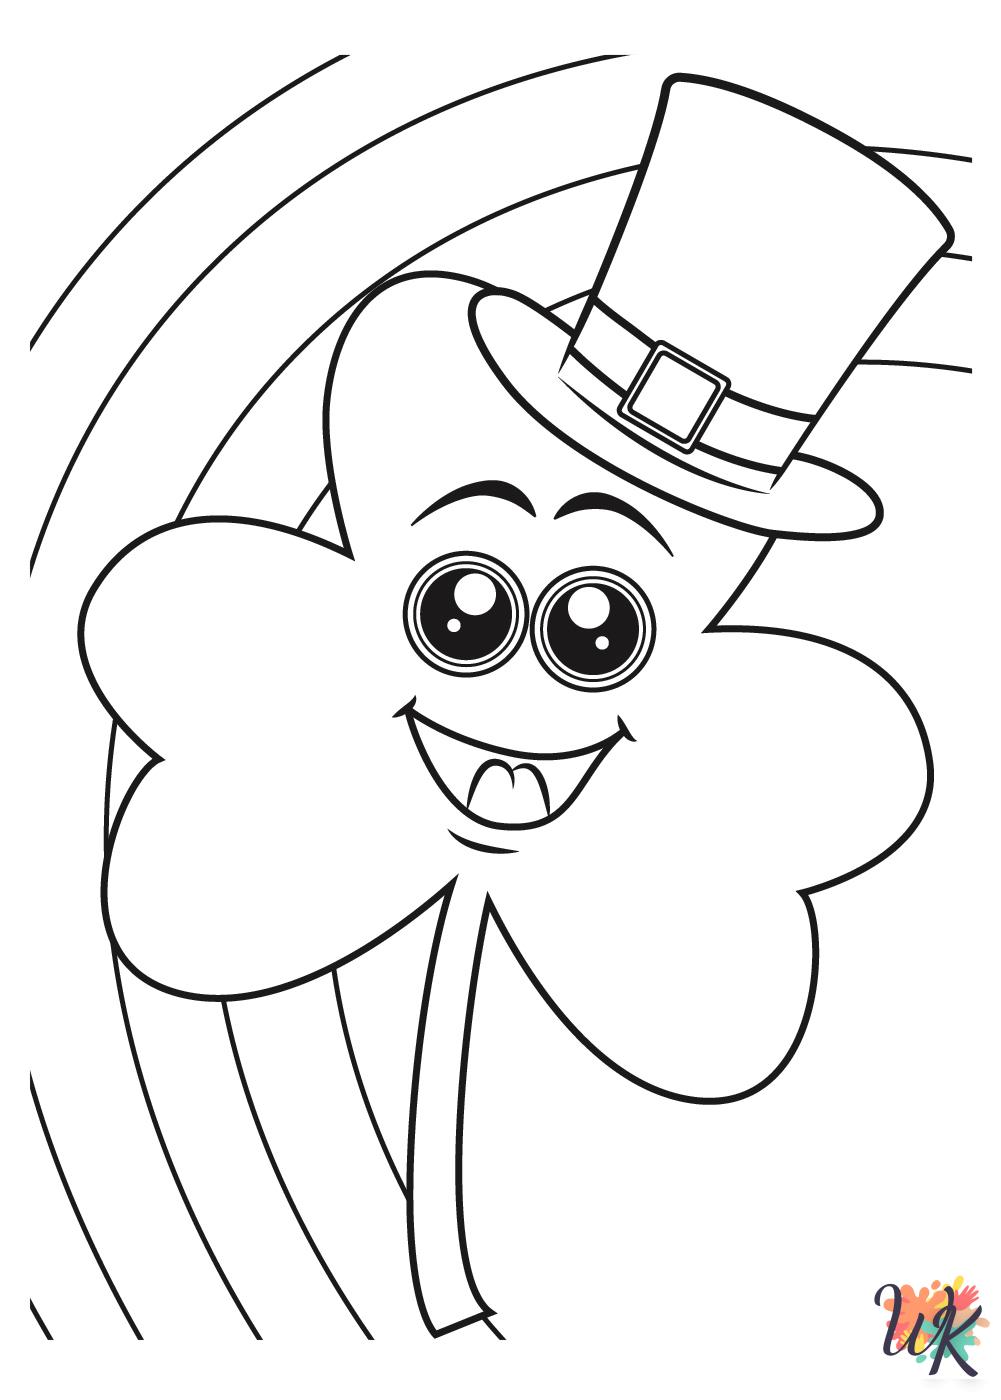 Shamrock free coloring pages